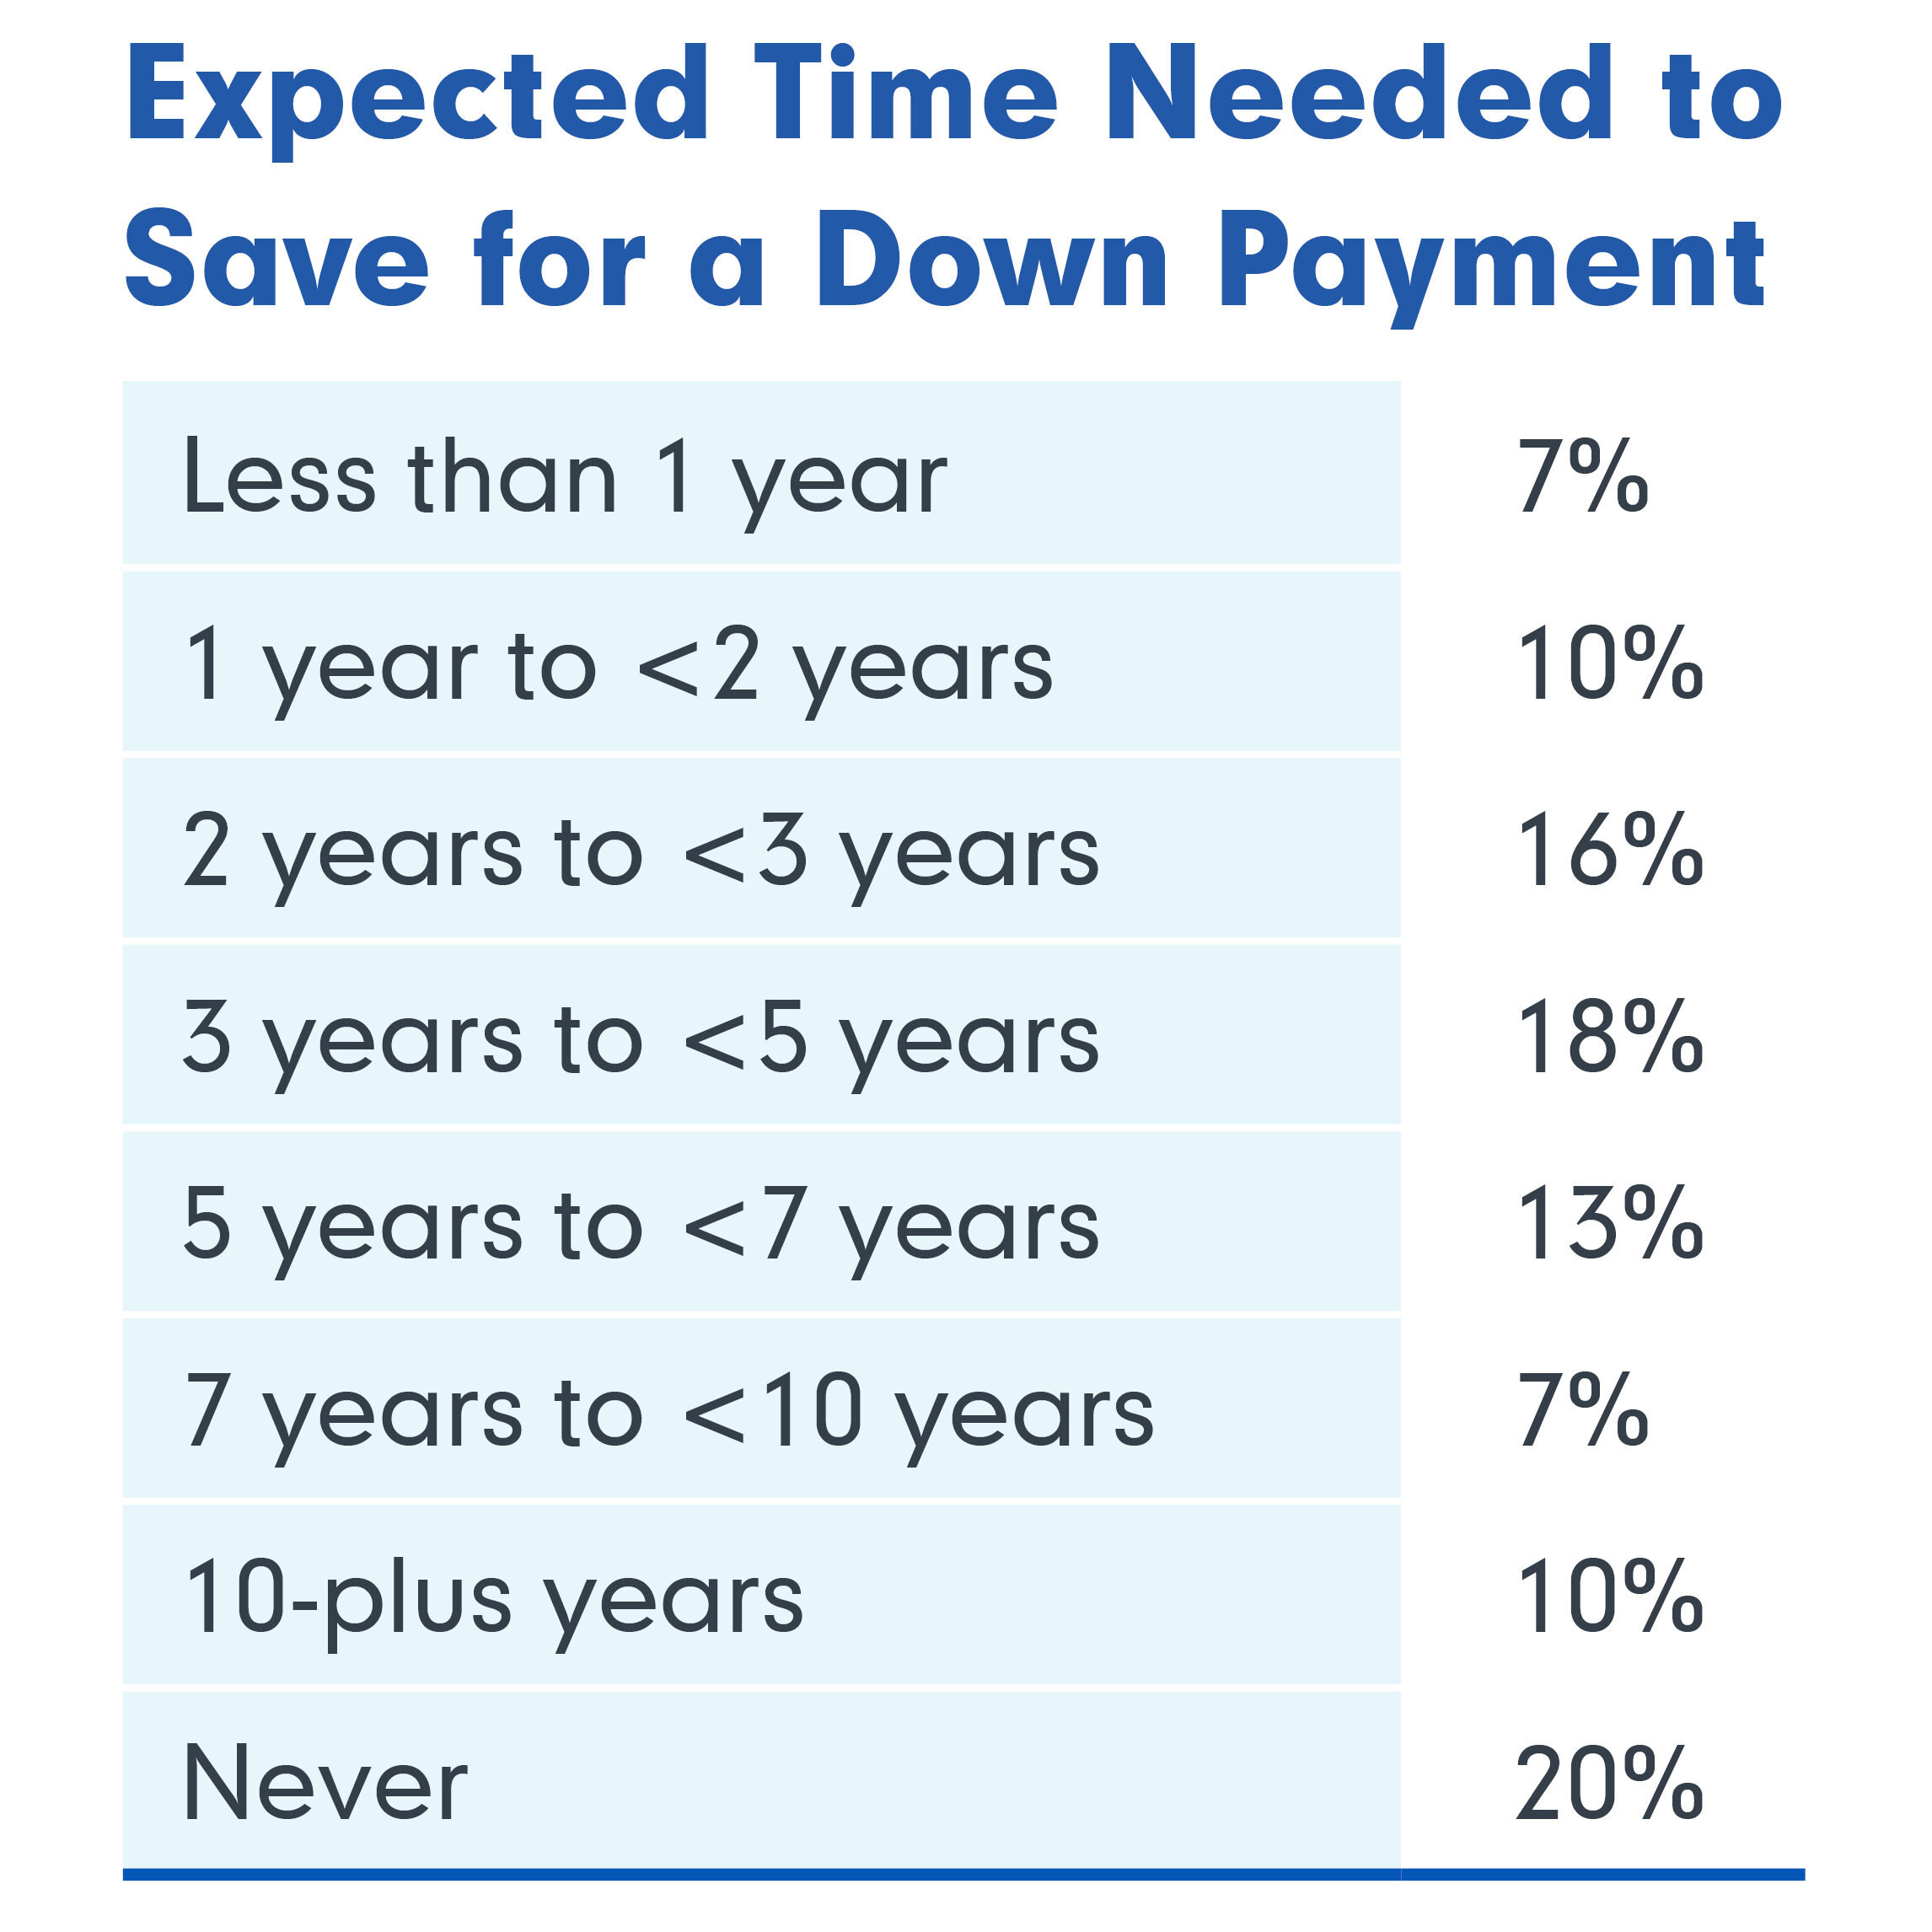 Expected time needed to save for a down payment: Less than 1 year - 7%; 1 year to less than 2 years - 10%; 2 years to less than 3 years - 16%; 3 years to less than 5 years - 18%; 5 years to less than 7 years - 13%; 7 years to less than 10 years - 7%; 10-plus years - 10%; Never - 20%.